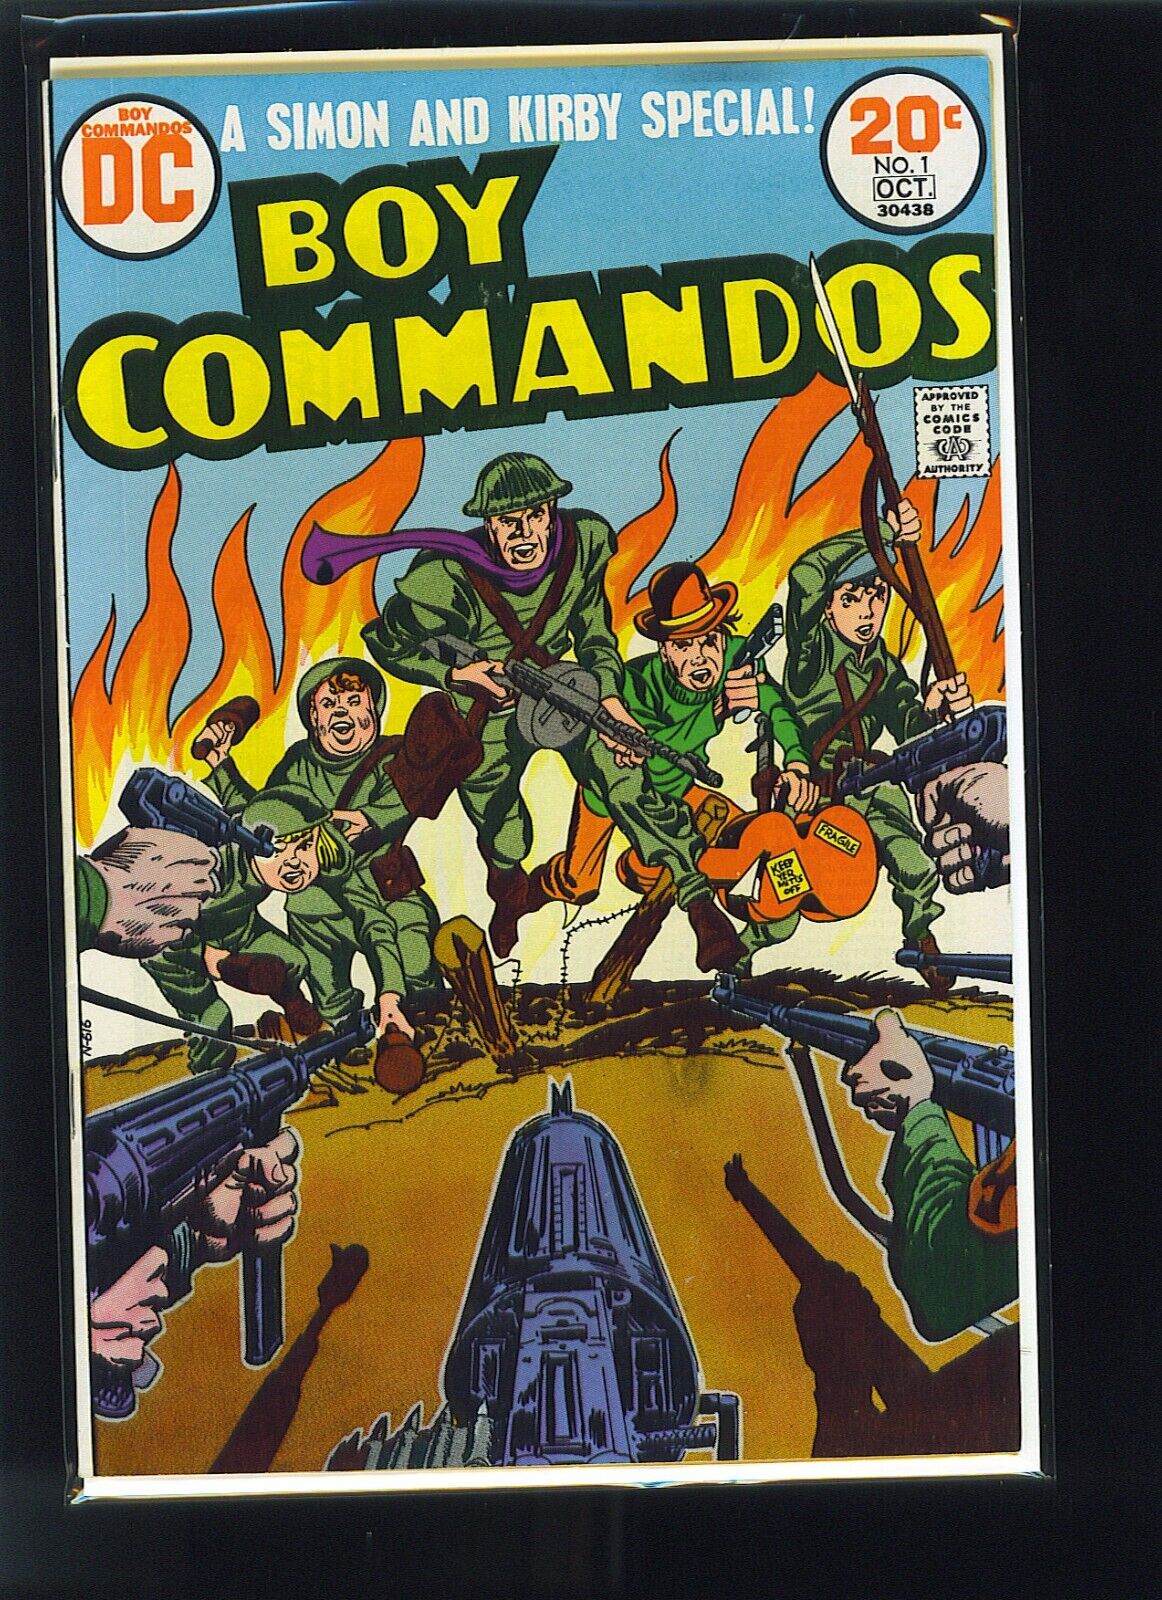 Boy Commandos #1 Simon and Kirby 1970s Reprint 2 copies VF and F